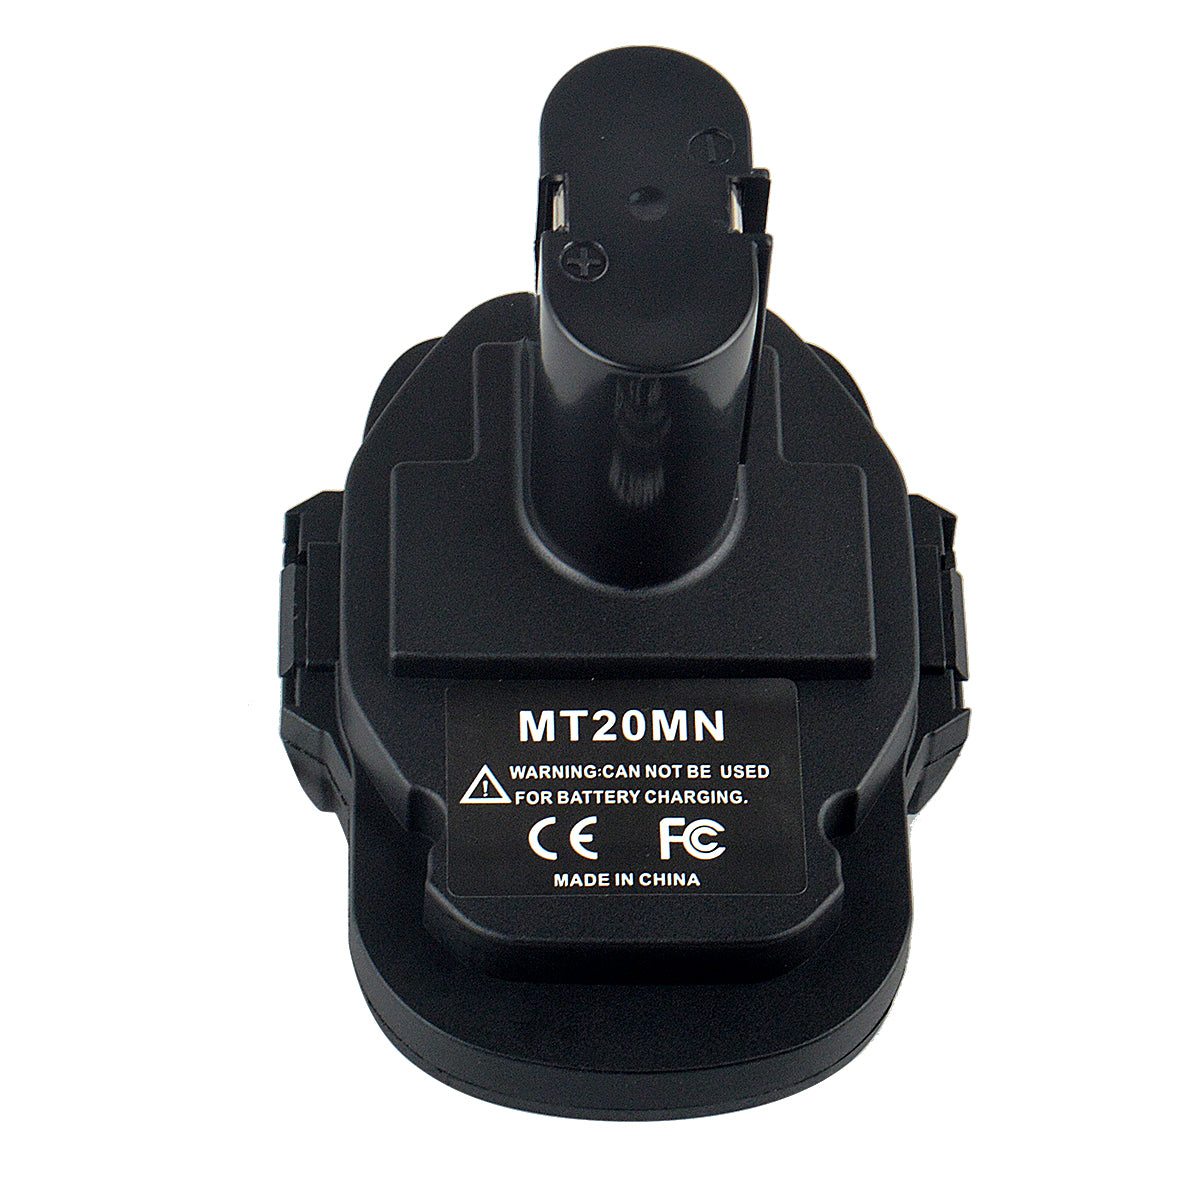 DM18M Battery Converter Adapter: Engineered for Makita tools, it trans ·